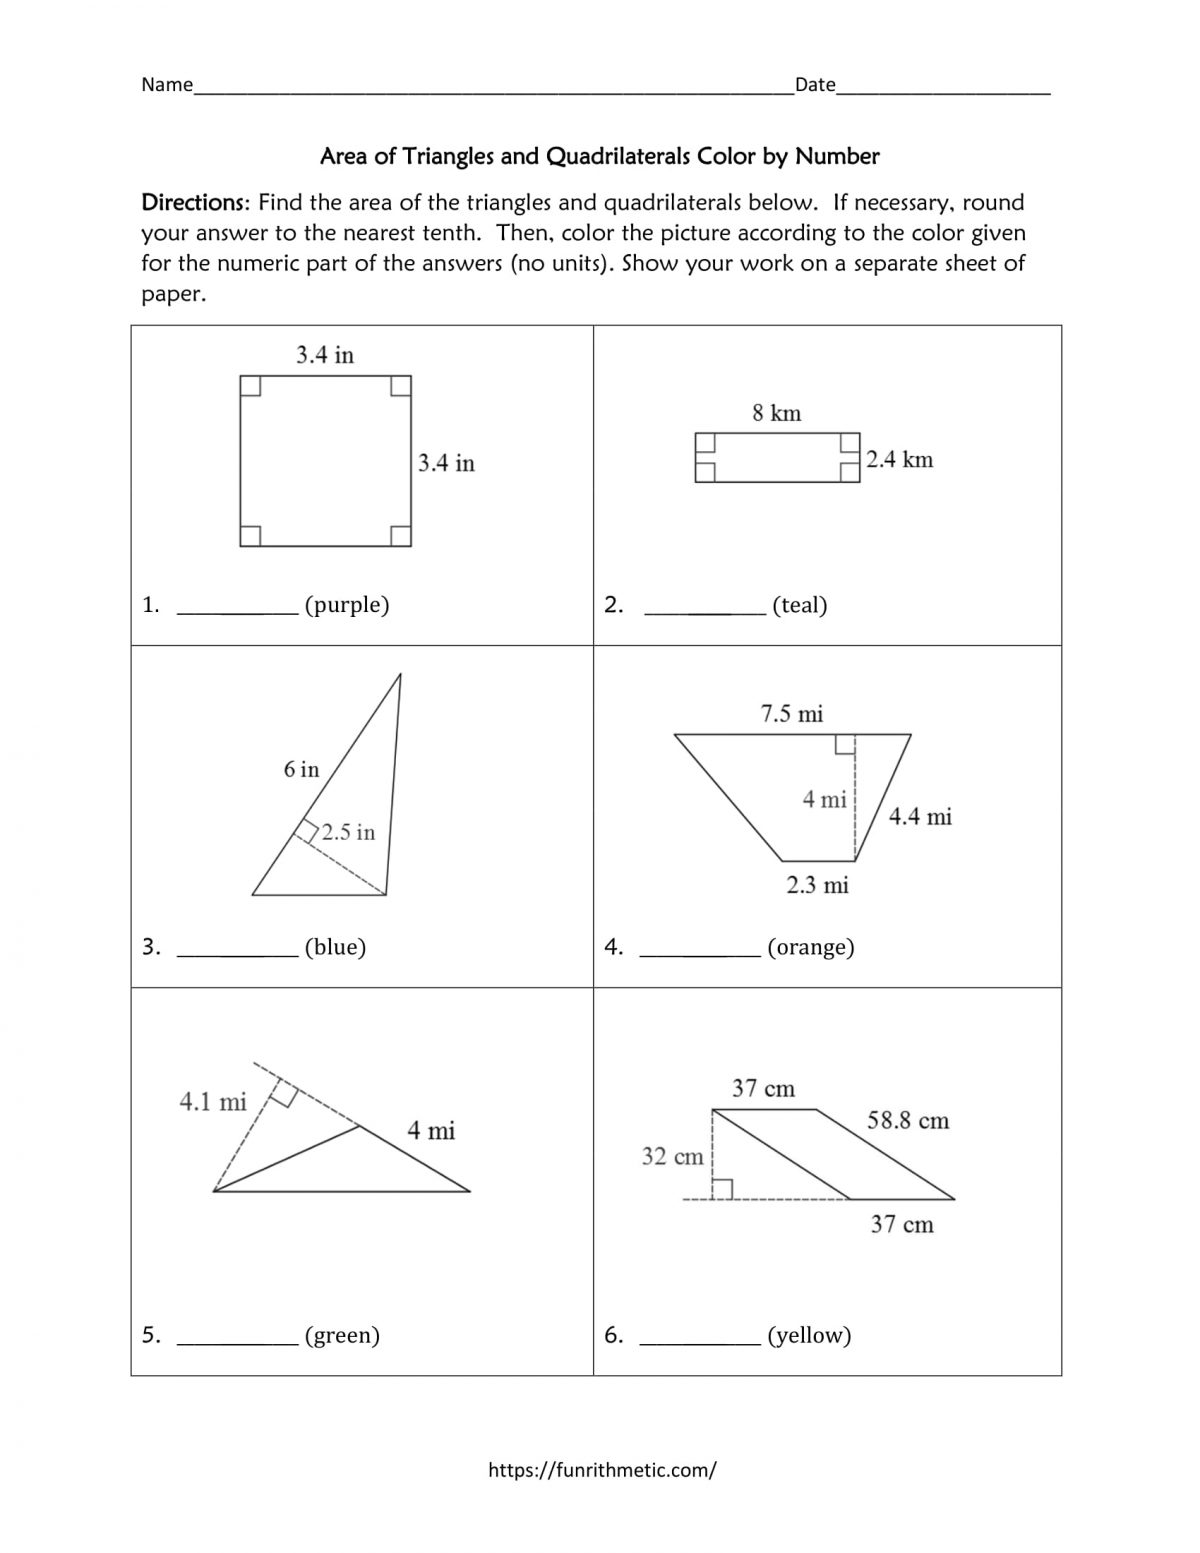 area of triangles and quadrilaterals